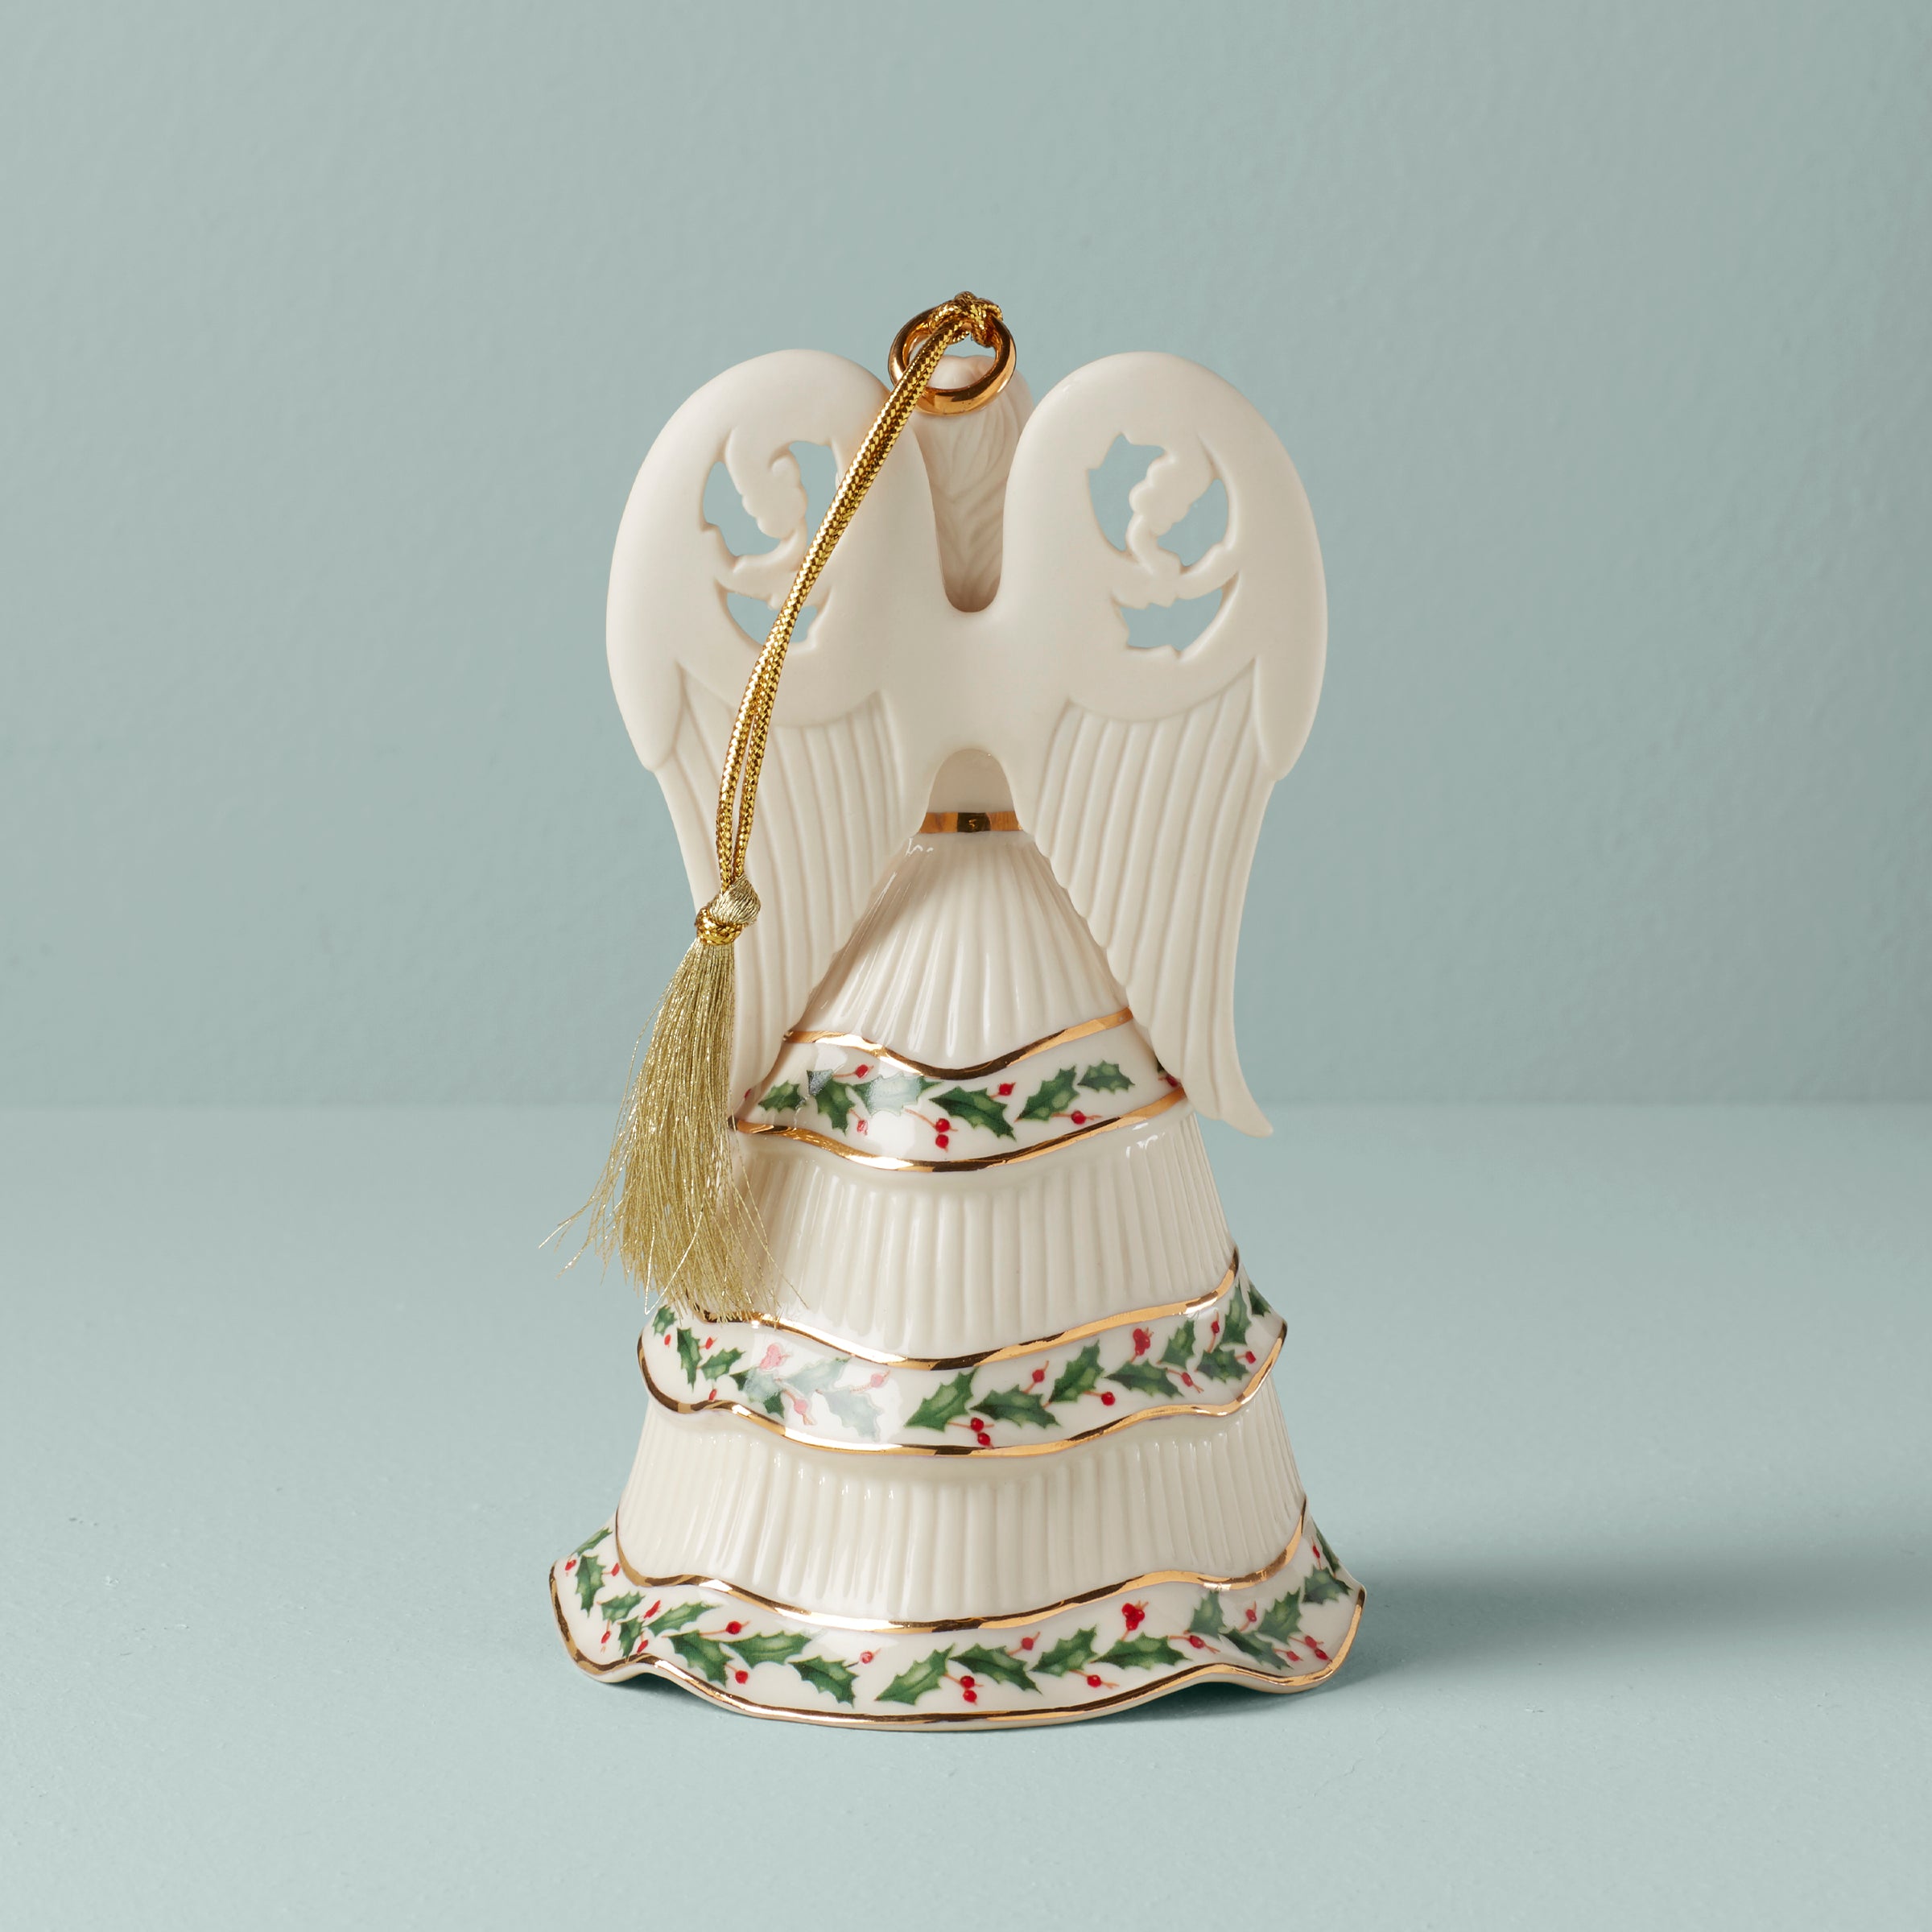 Angel Bell Holding Candle Ornament